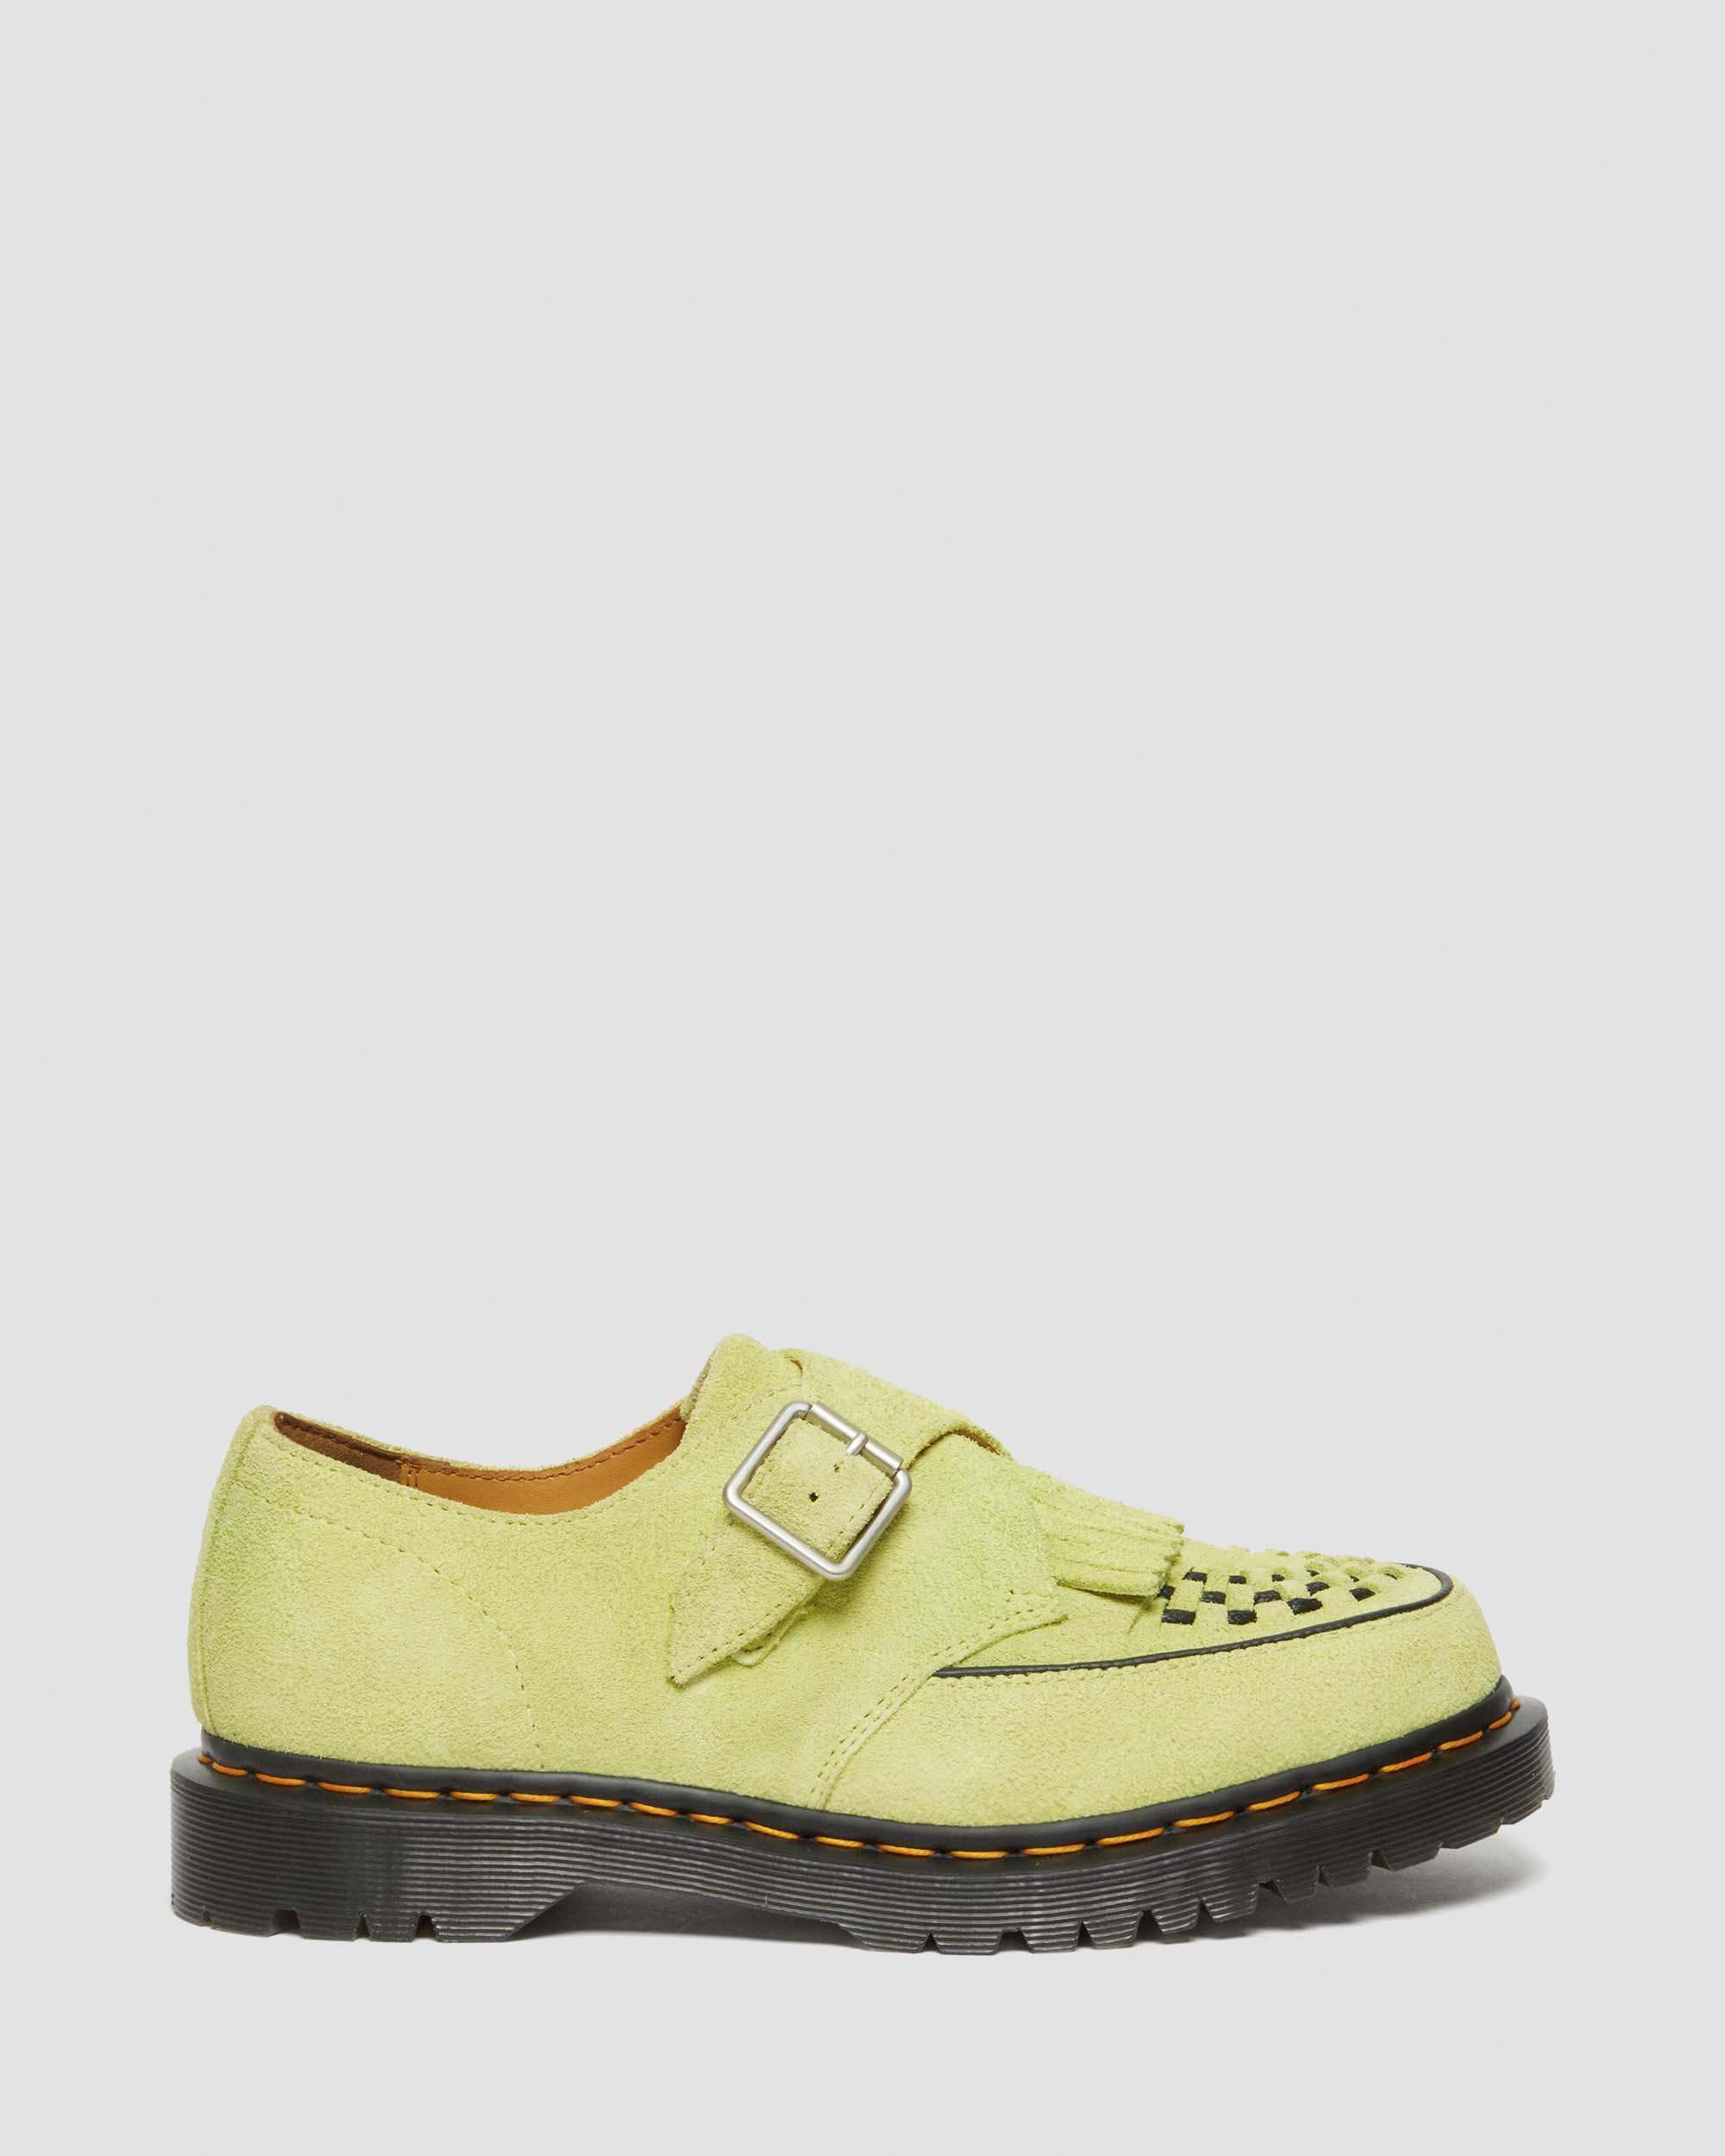 Ramsey Suede Kiltie Buckle Creepers in Lime Green